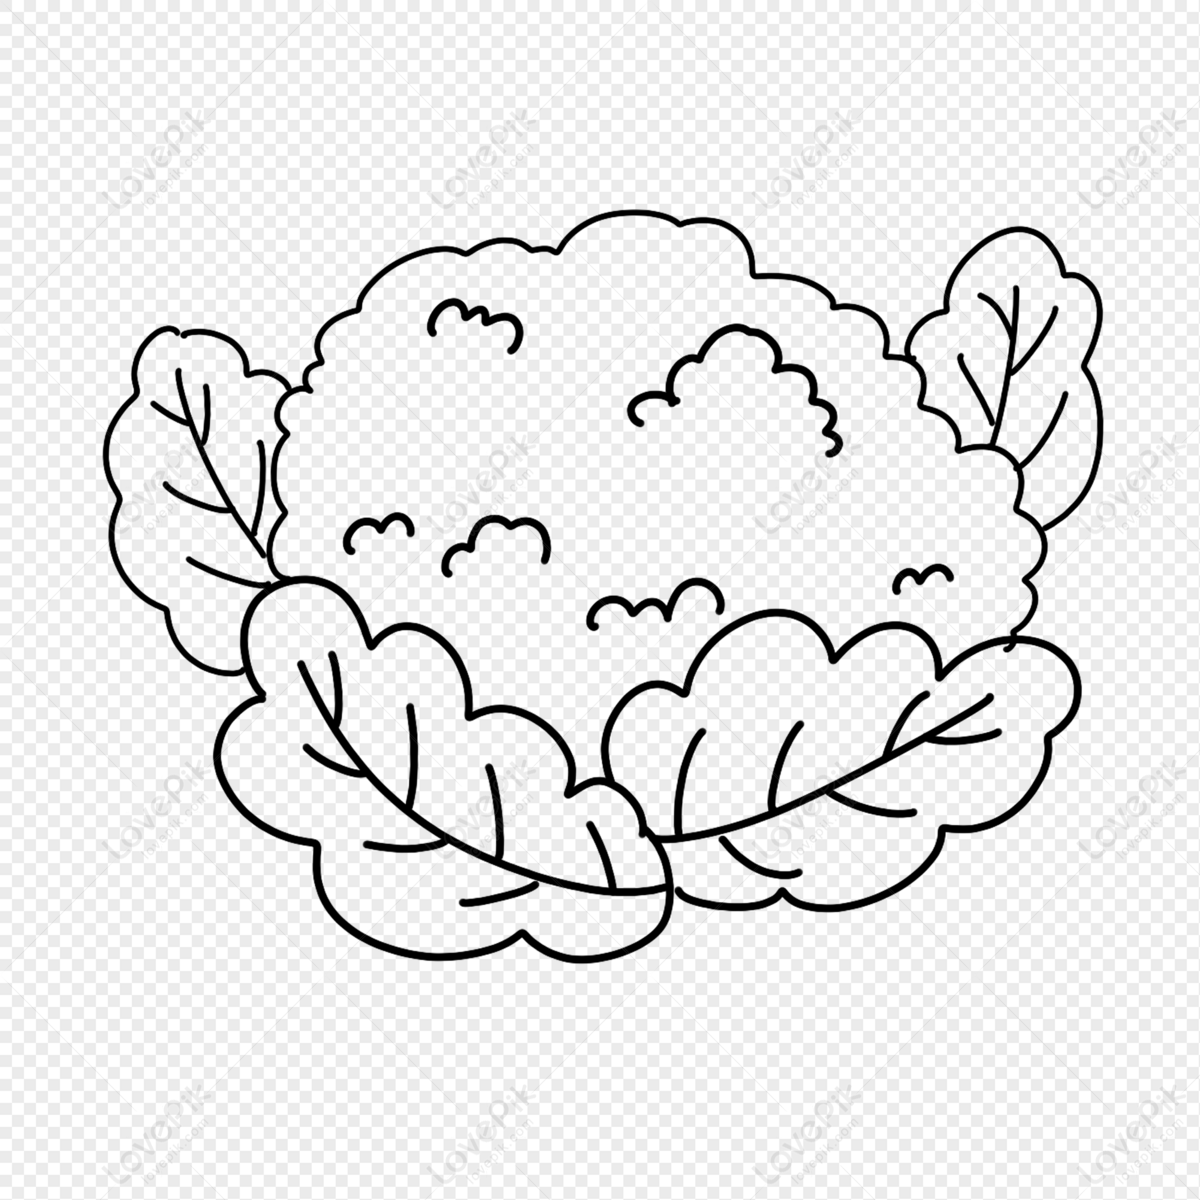 Cauliflower Line Art: Over 1,933 Royalty-Free Licensable Stock  Illustrations & Drawings | Shutterstock